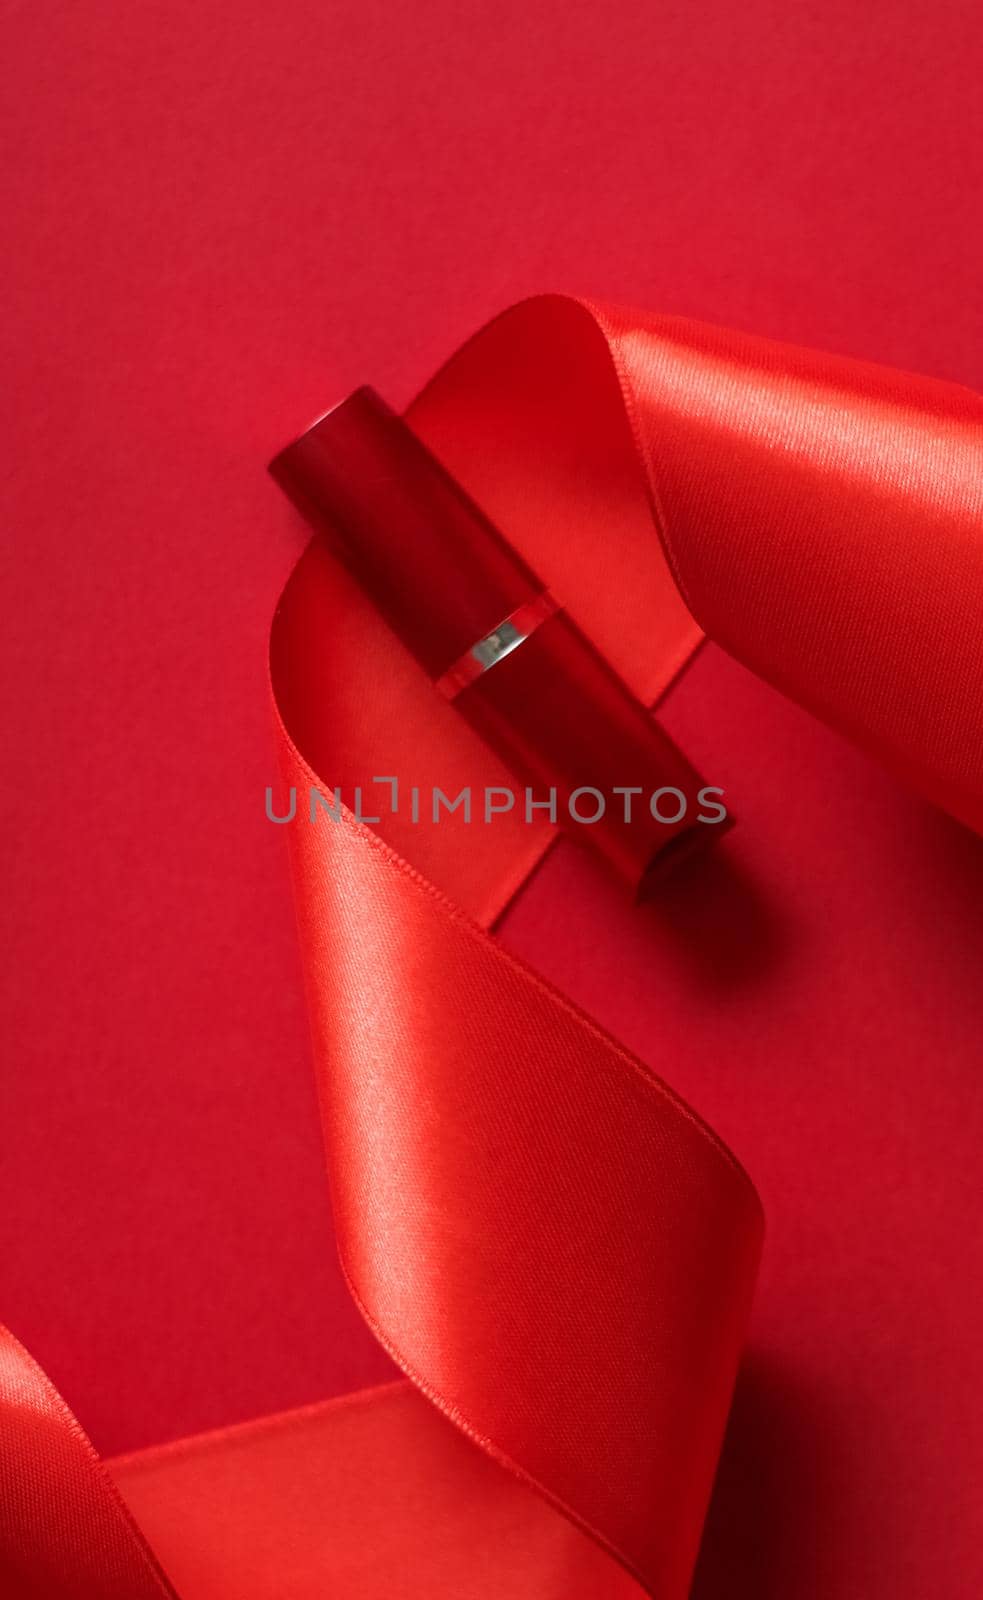 Luxury lipstick and silk ribbon on red holiday background, make-up and cosmetics flatlay for beauty brand product design by Anneleven